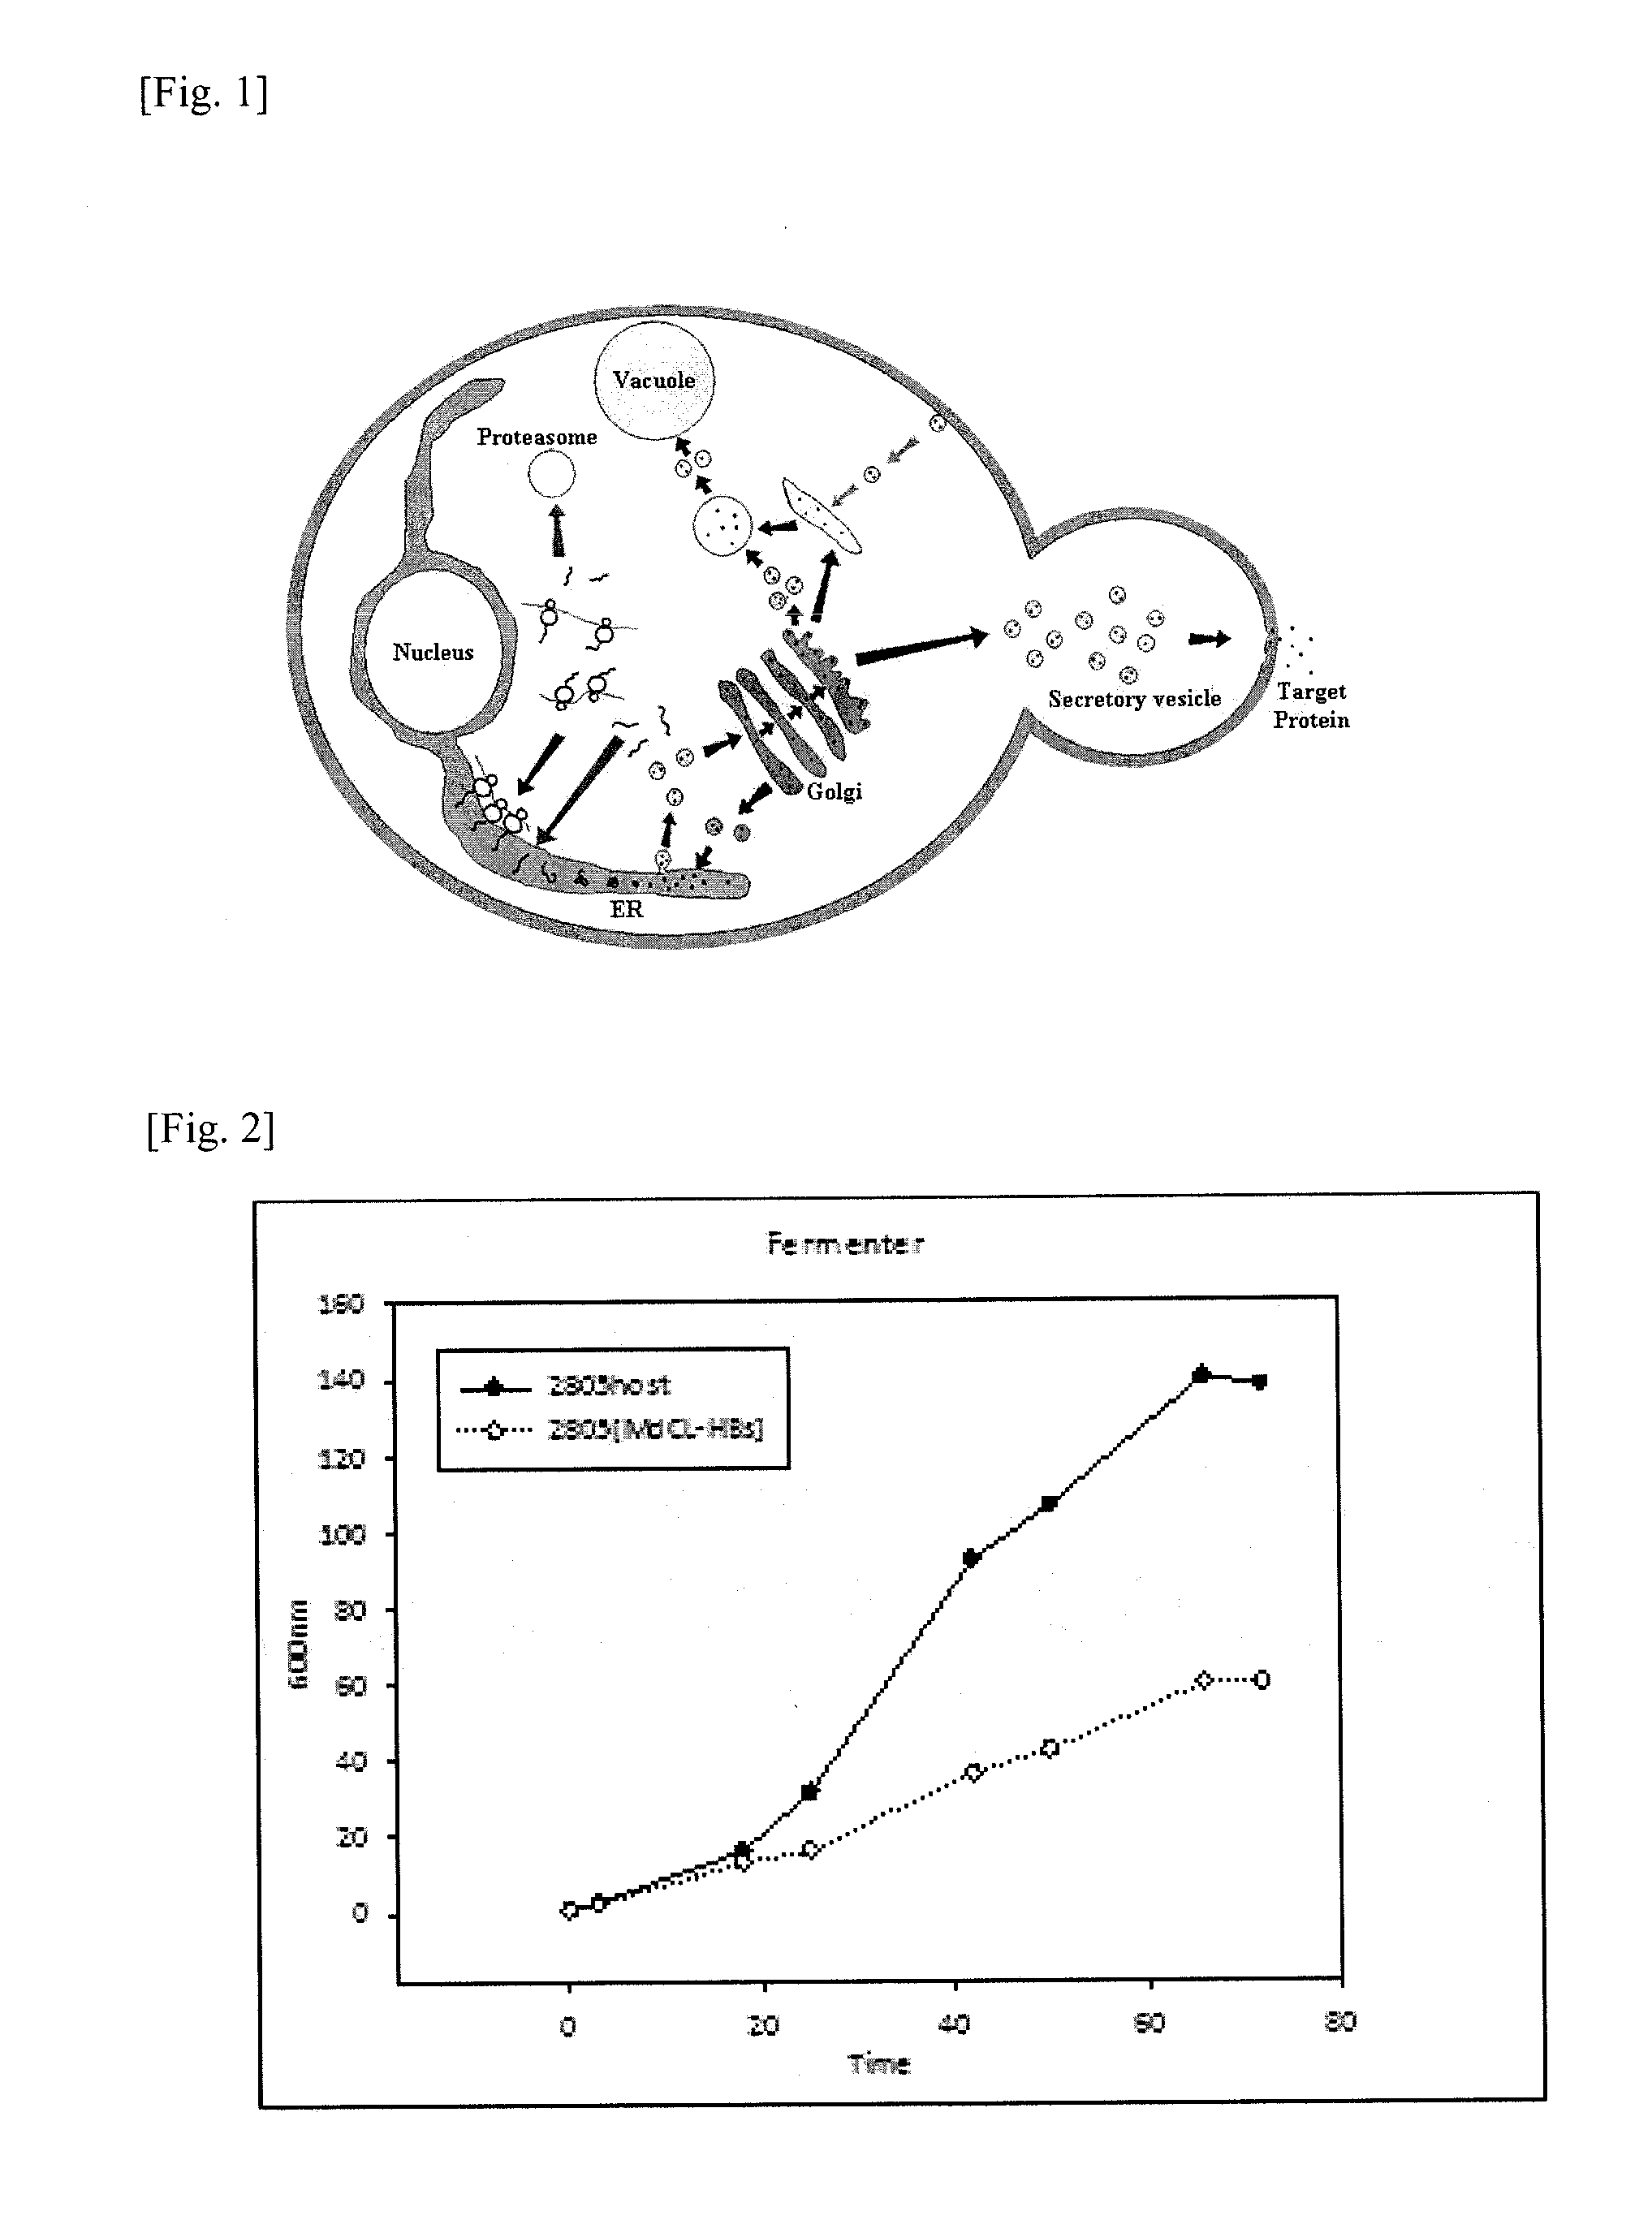 Method for a production of a recombinant protein using yeast co-expression system